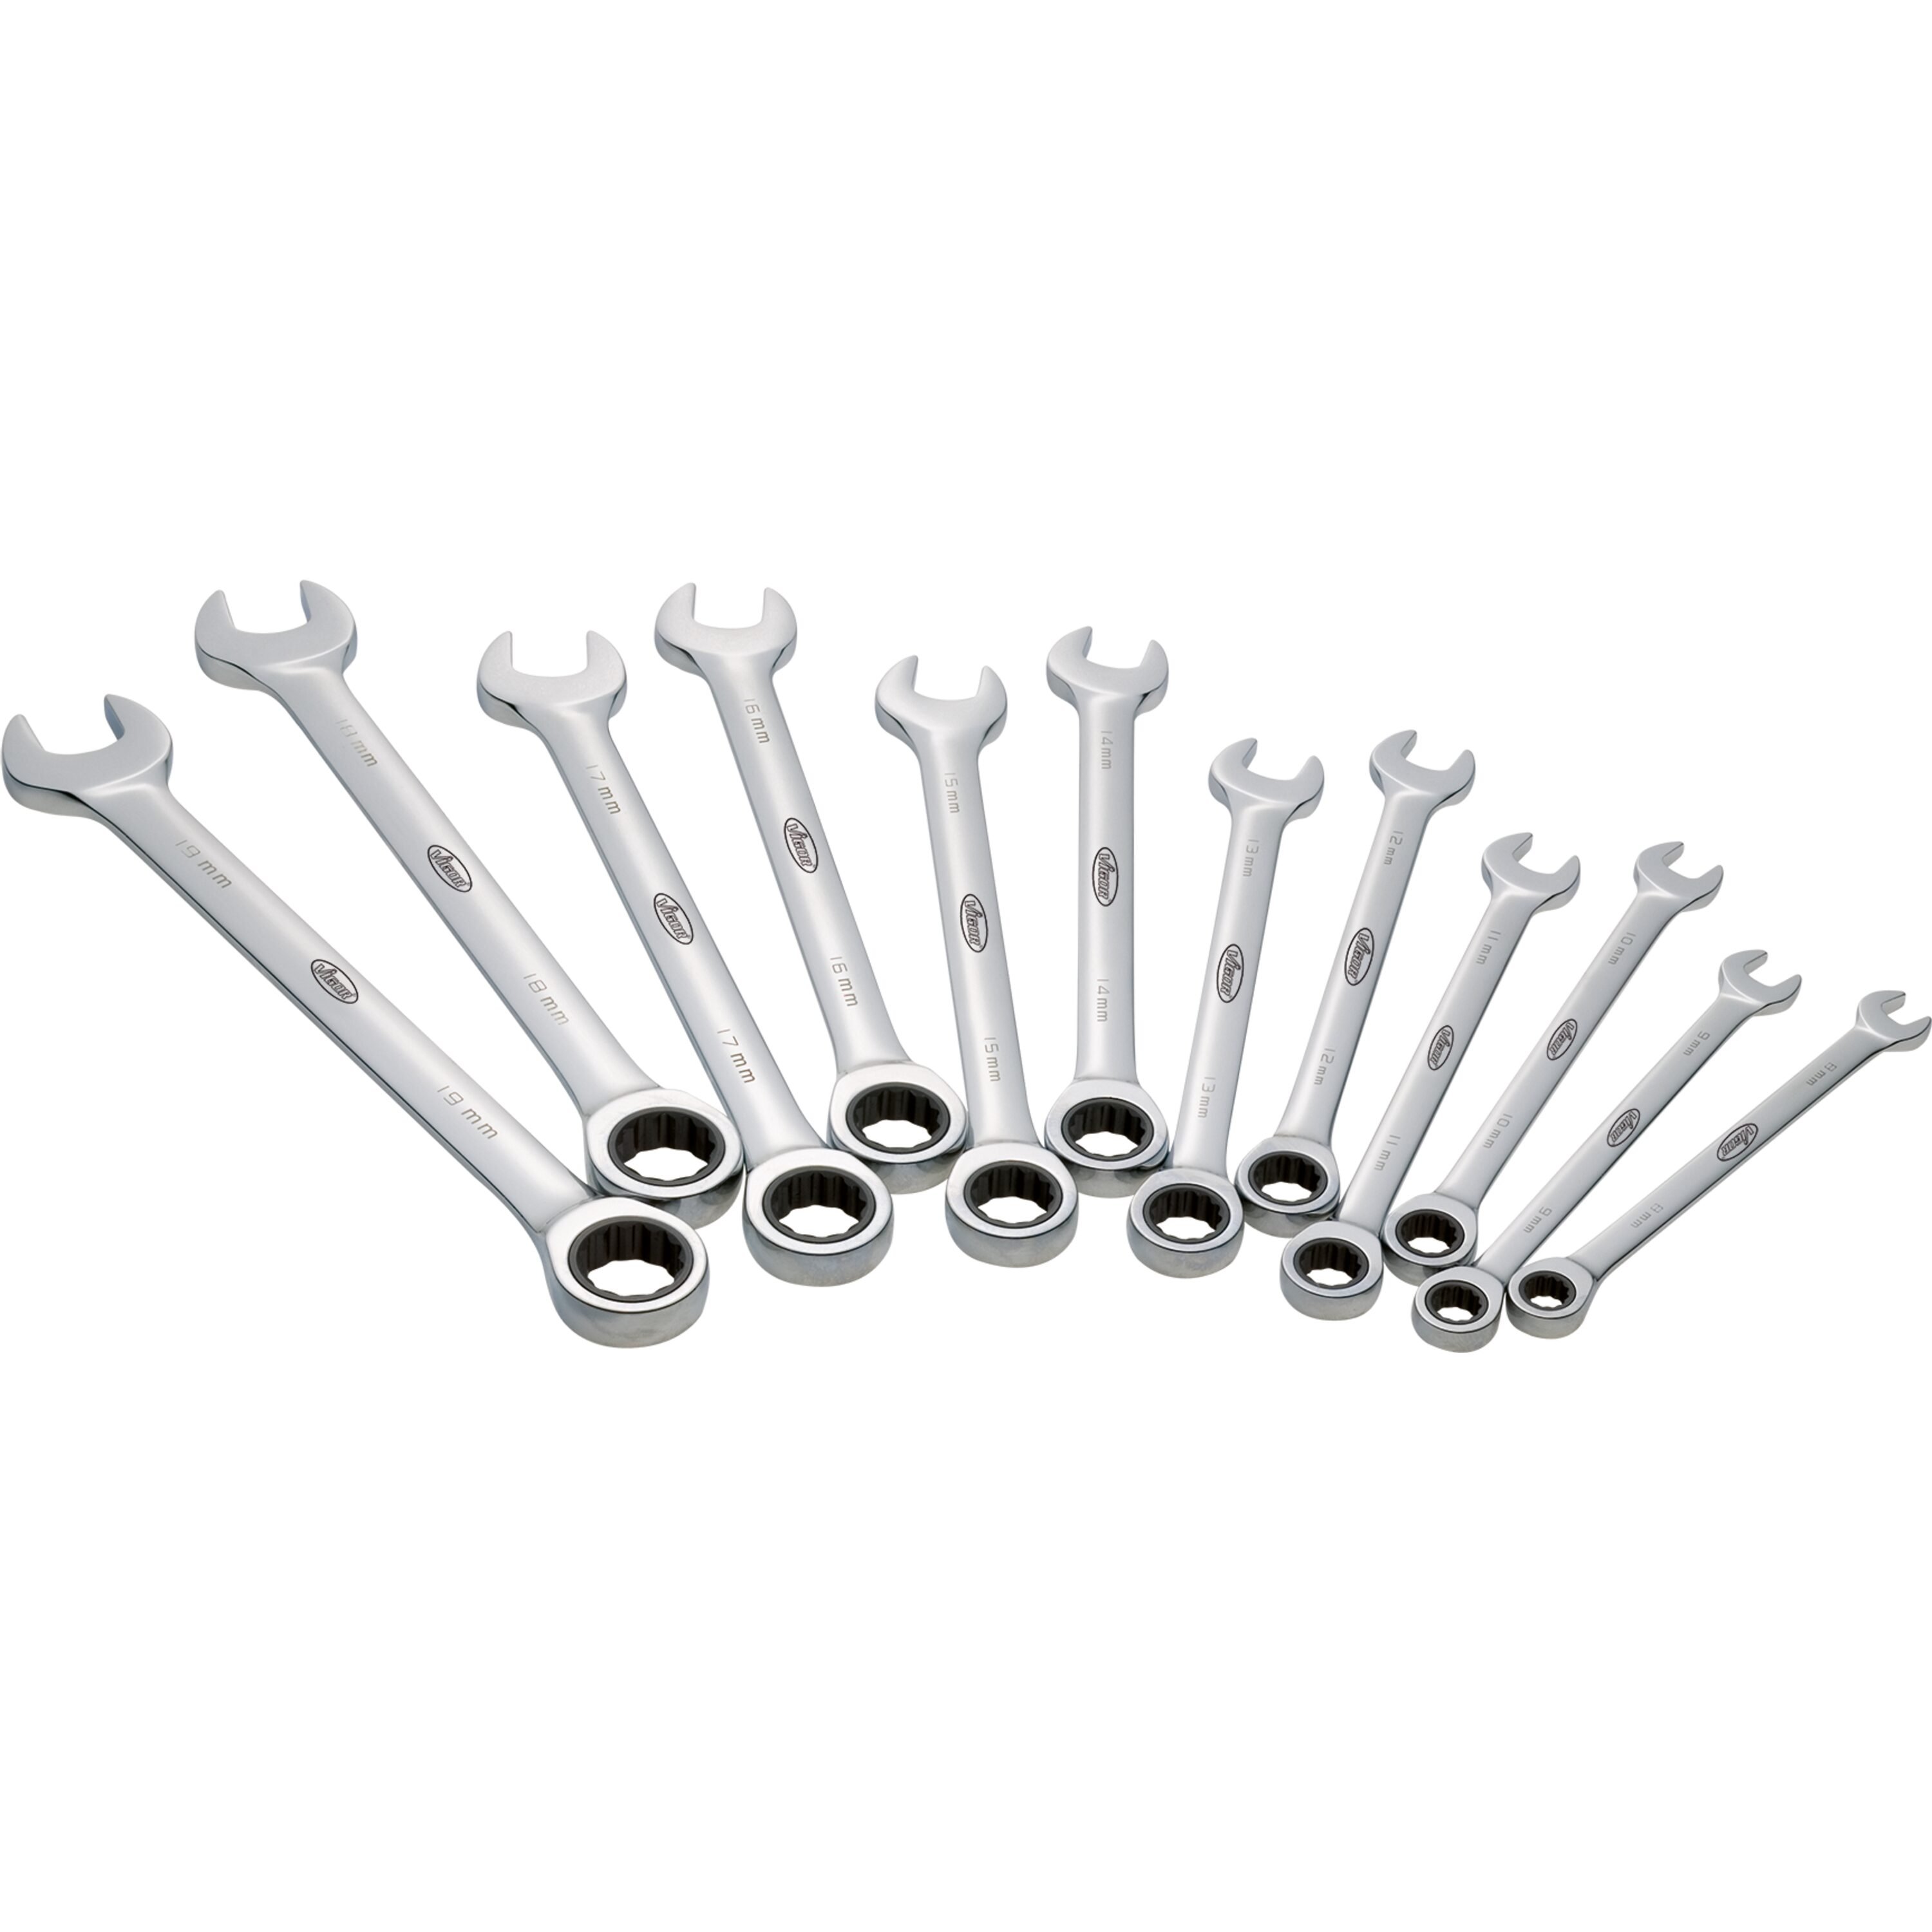 Open-end wrenches, spanners, socket wrenches, etc. Ring spanner, Size: 8 - 19 mm, 12 pcs  Art. V1031